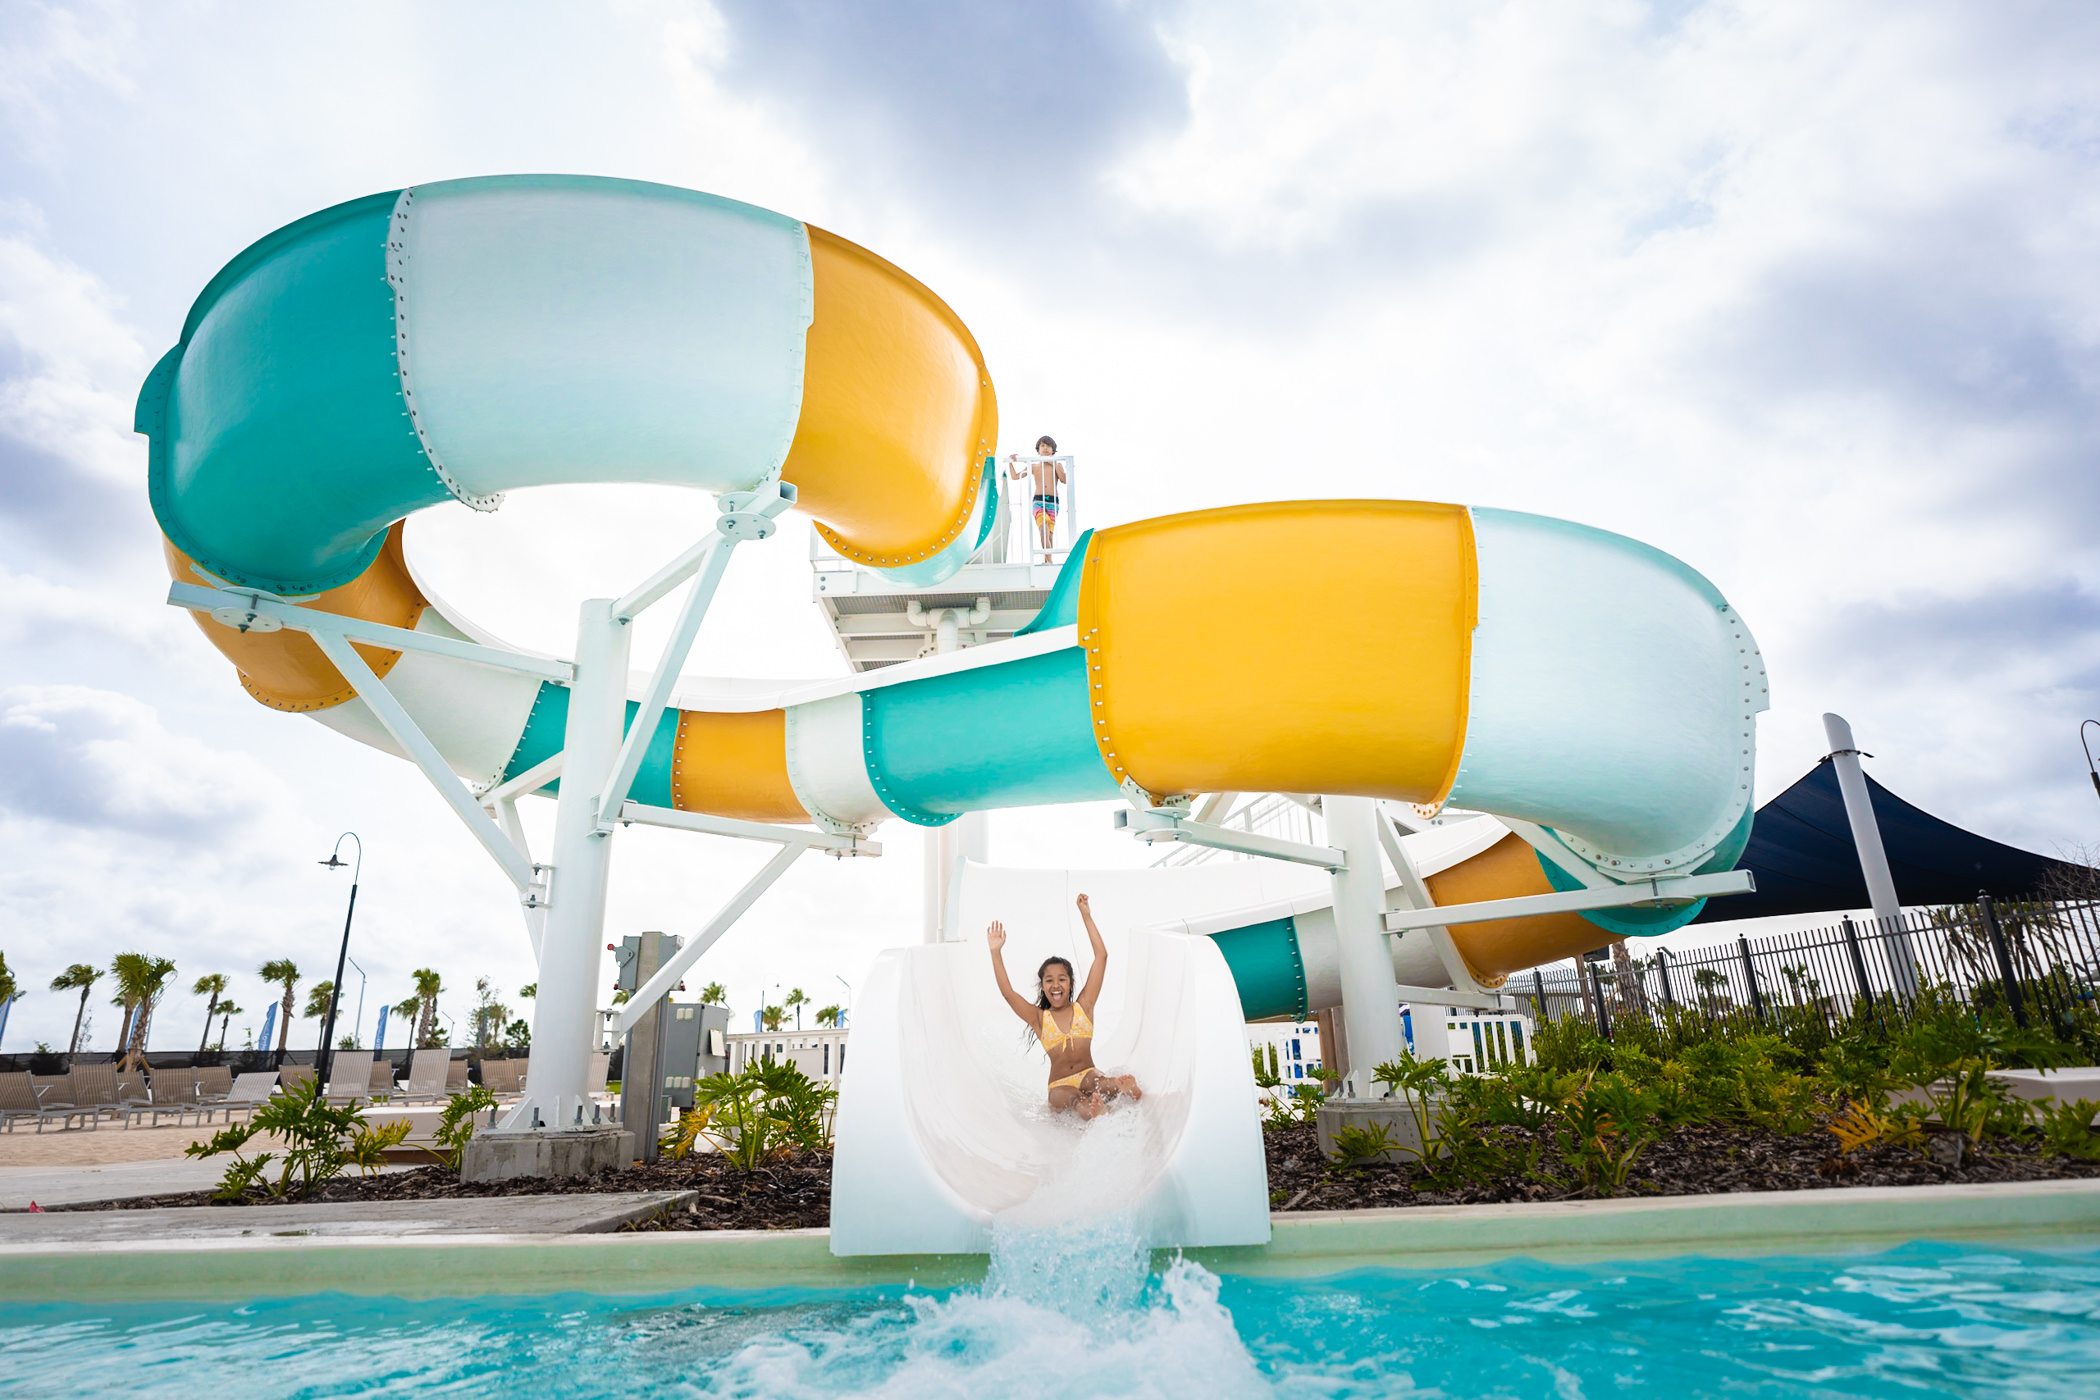 Young woman sliding down a turquoise and yellow water slide